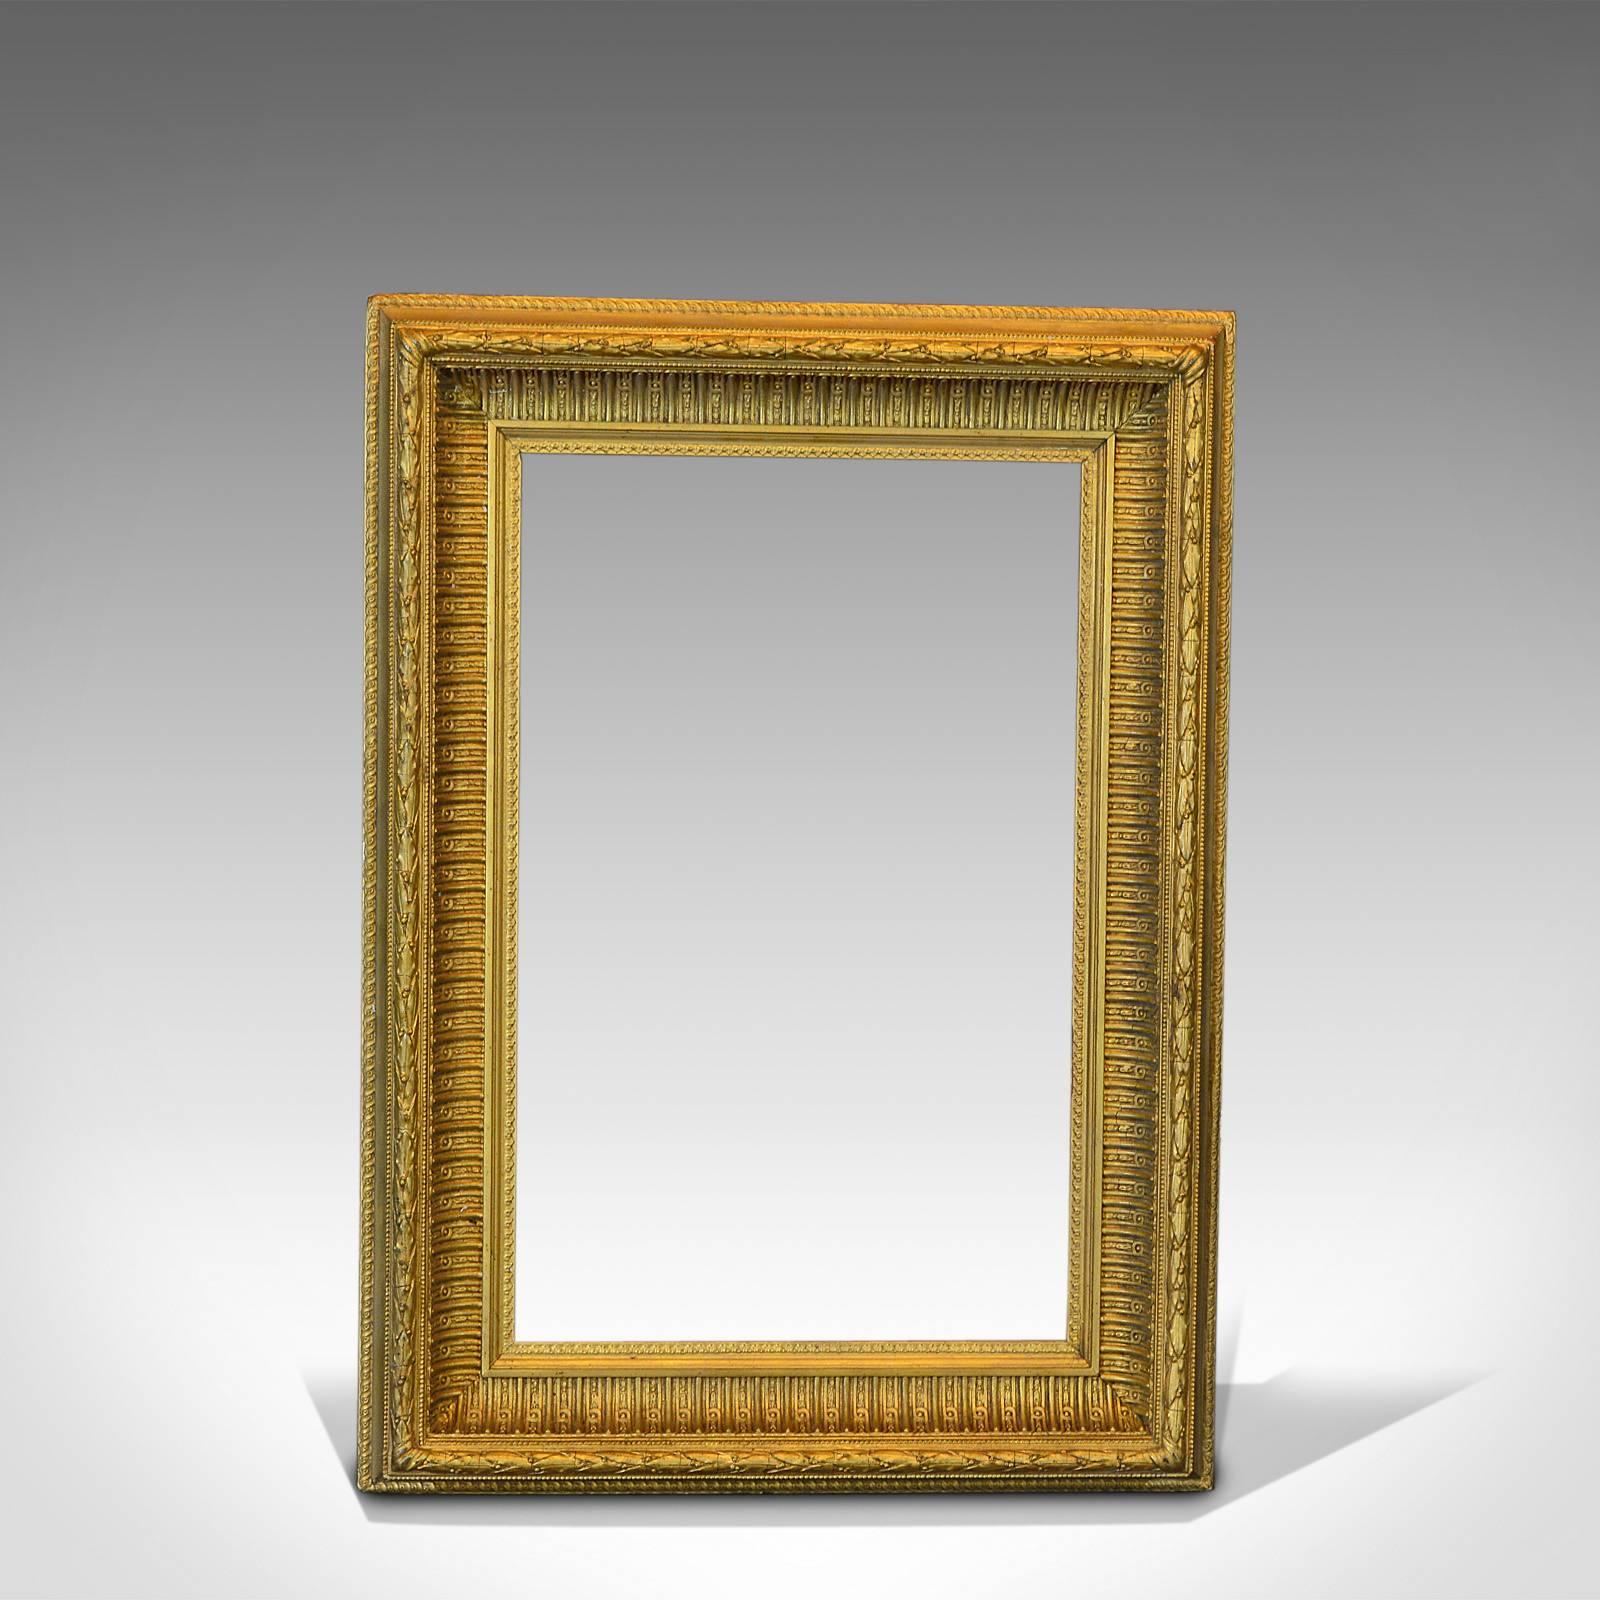 This is an antique gilt gesso picture frame dating to the Victorian period, circa 1880.

A mid-sized frame with complete, original mouldings, the wood and gilt gesso displays an attractive aged lustre. Suitable for landscape or portrait hanging